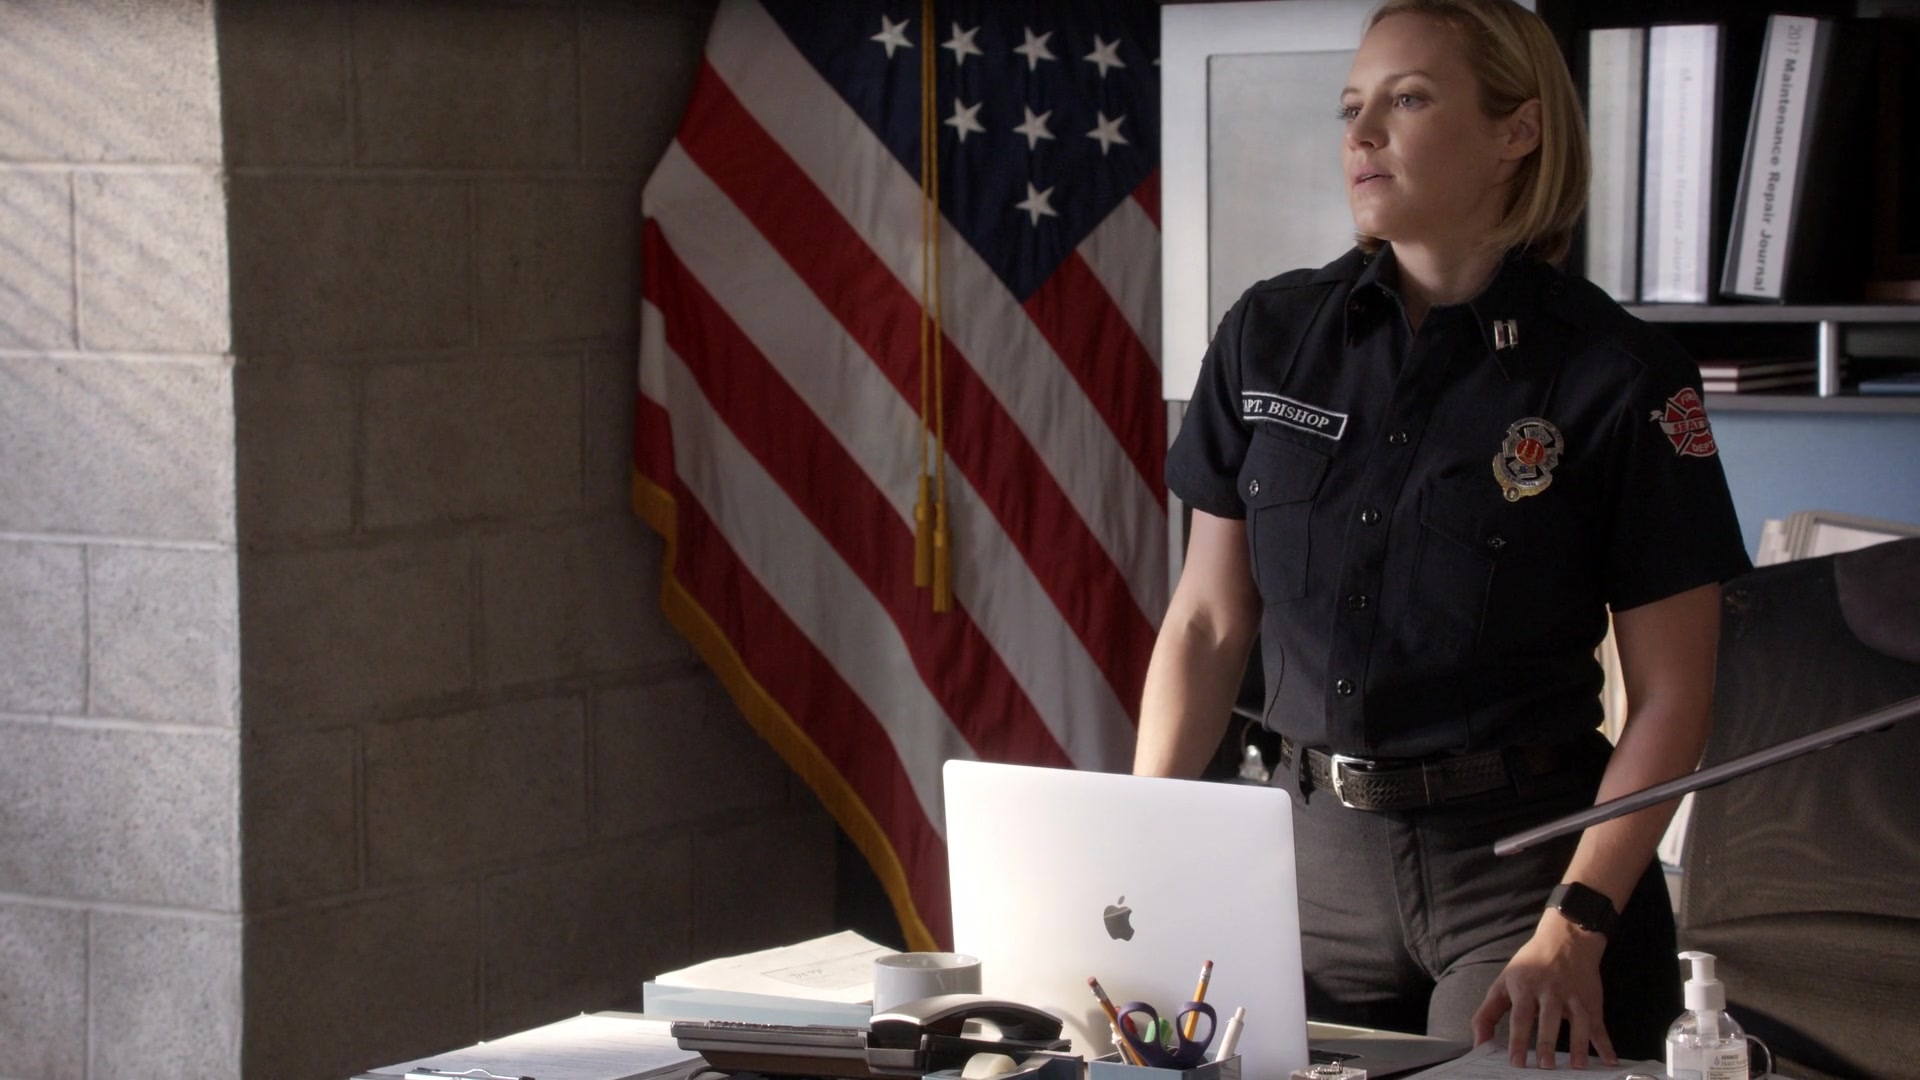 Apple Macbook Laptop Of Danielle Savre As Maya Bishop In Station 19 S04e03 We Are Family 2020